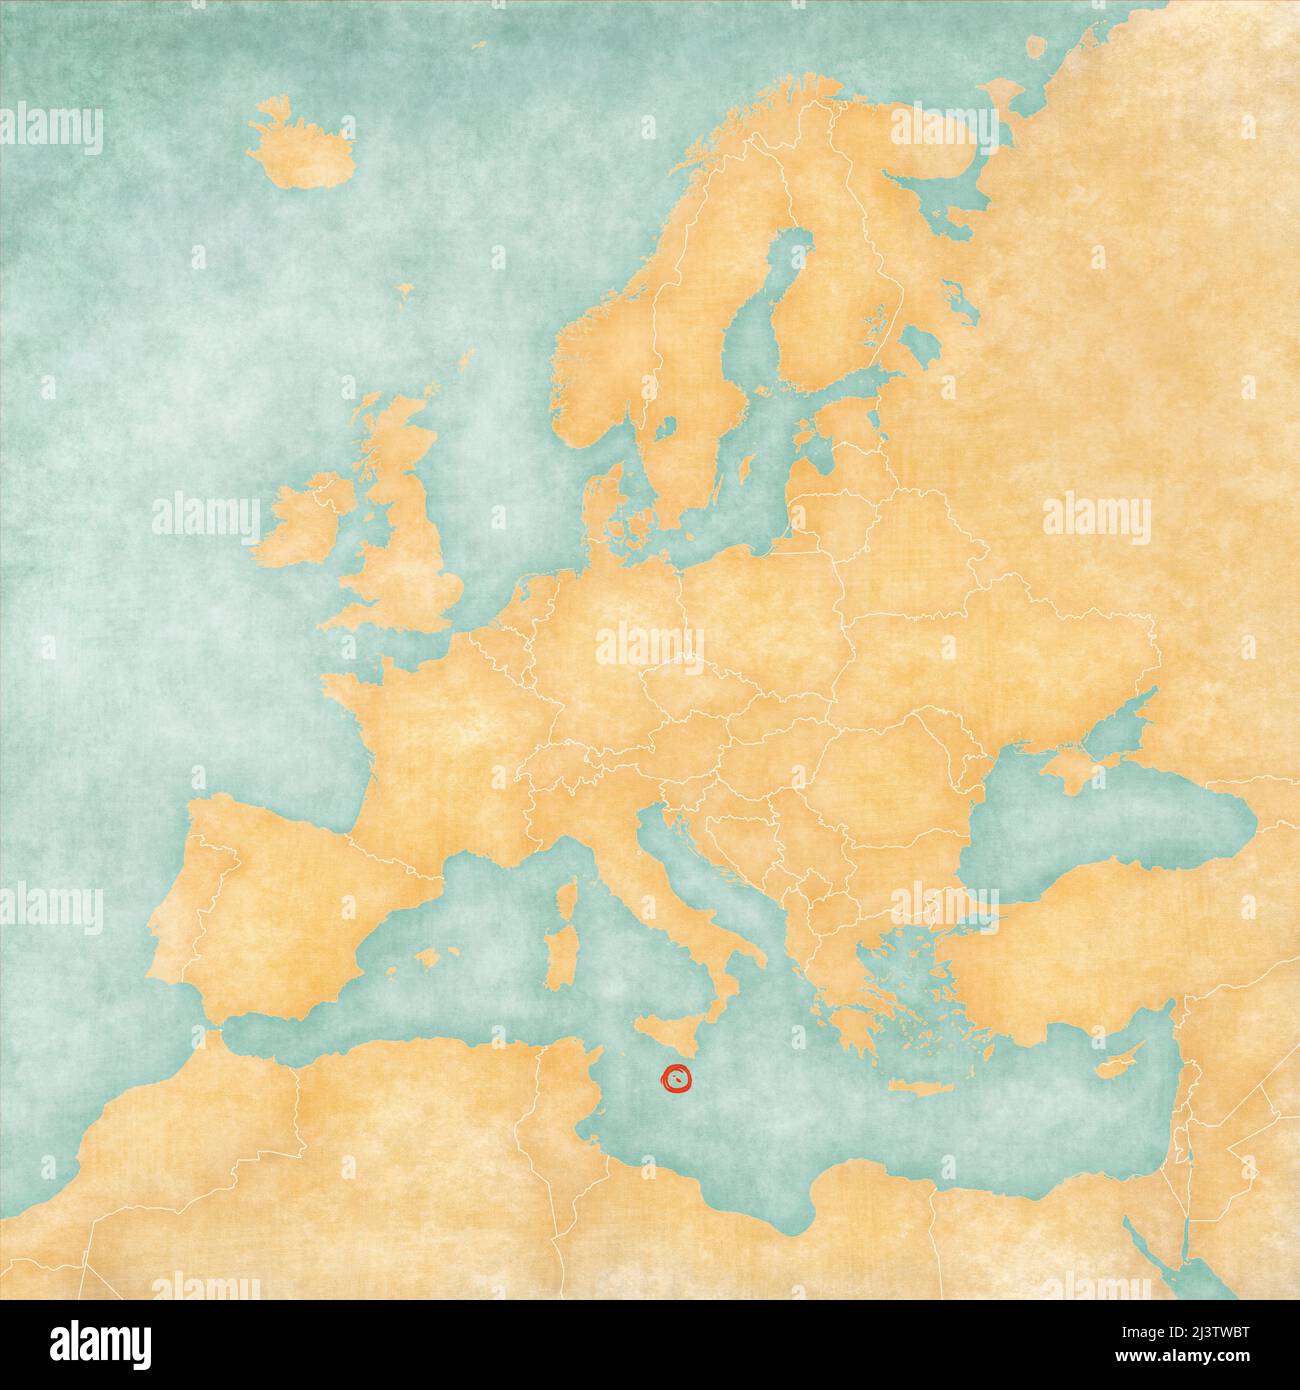 Malta on the map of Europe. The Map is in vintage summer style and sunny mood. The map has a soft grunge and vintage atmosphere, which acts as waterco Stock Photo